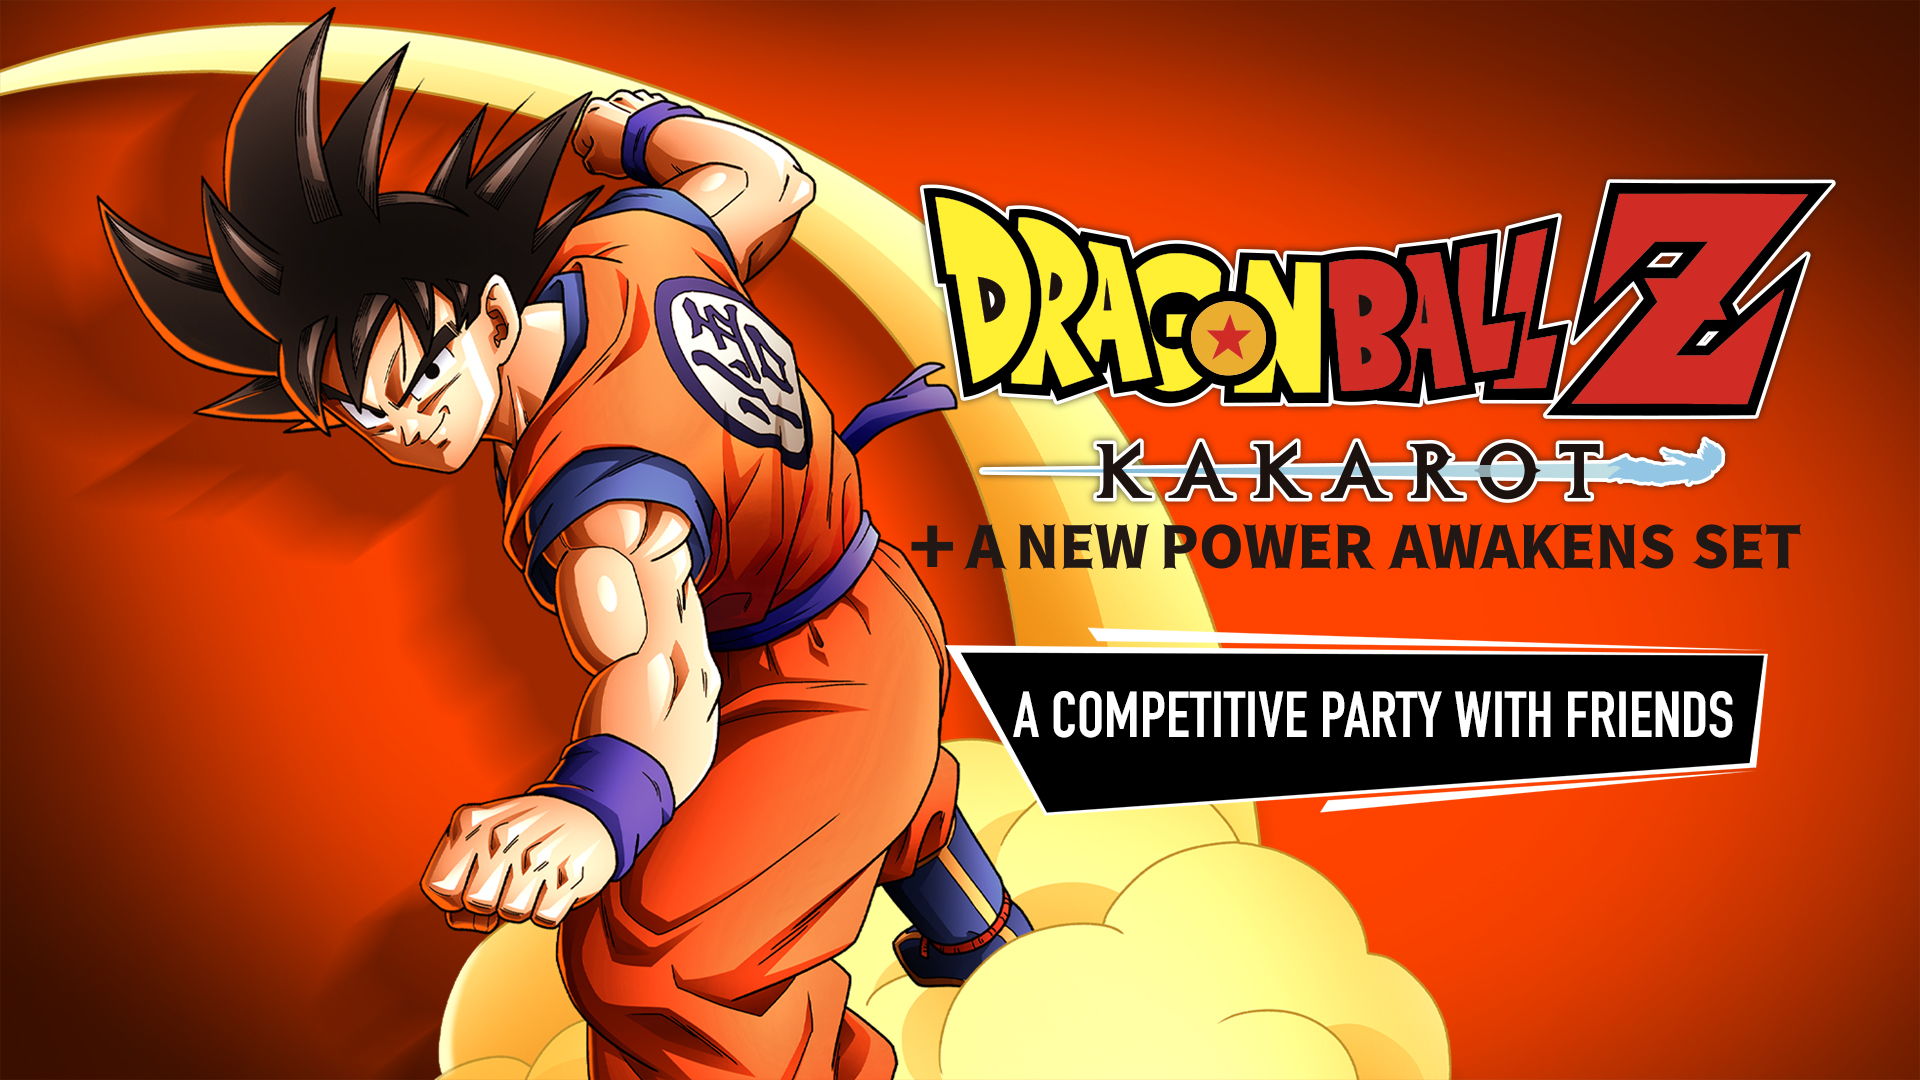 DRAGON BALL Z: KAKAROT + A NEW POWER AWAKENS SET A Competitive Party with Friends